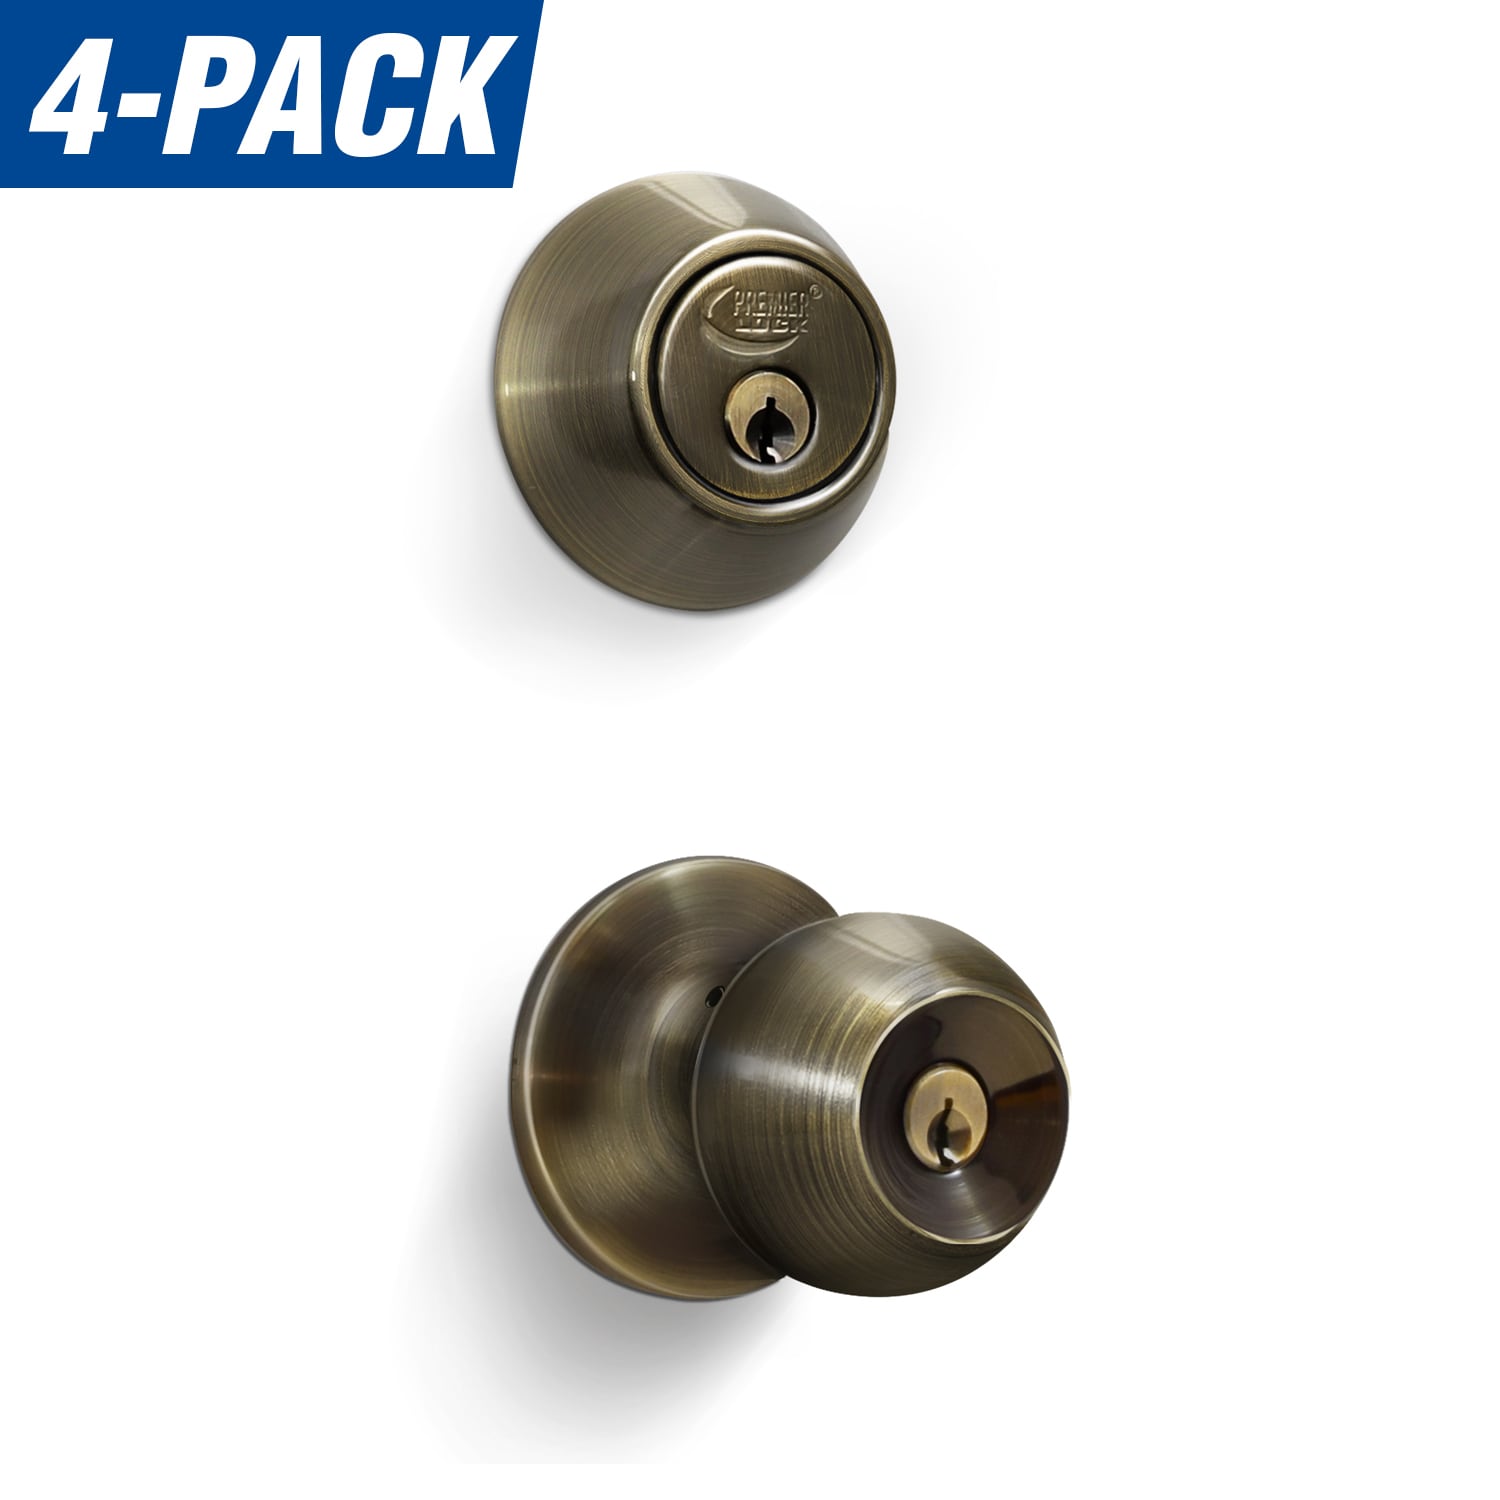 Small Antique Brass Flush Mount Lock for Cabinet Doors or Dresser Drawers w/Key | l-1ab, Gold